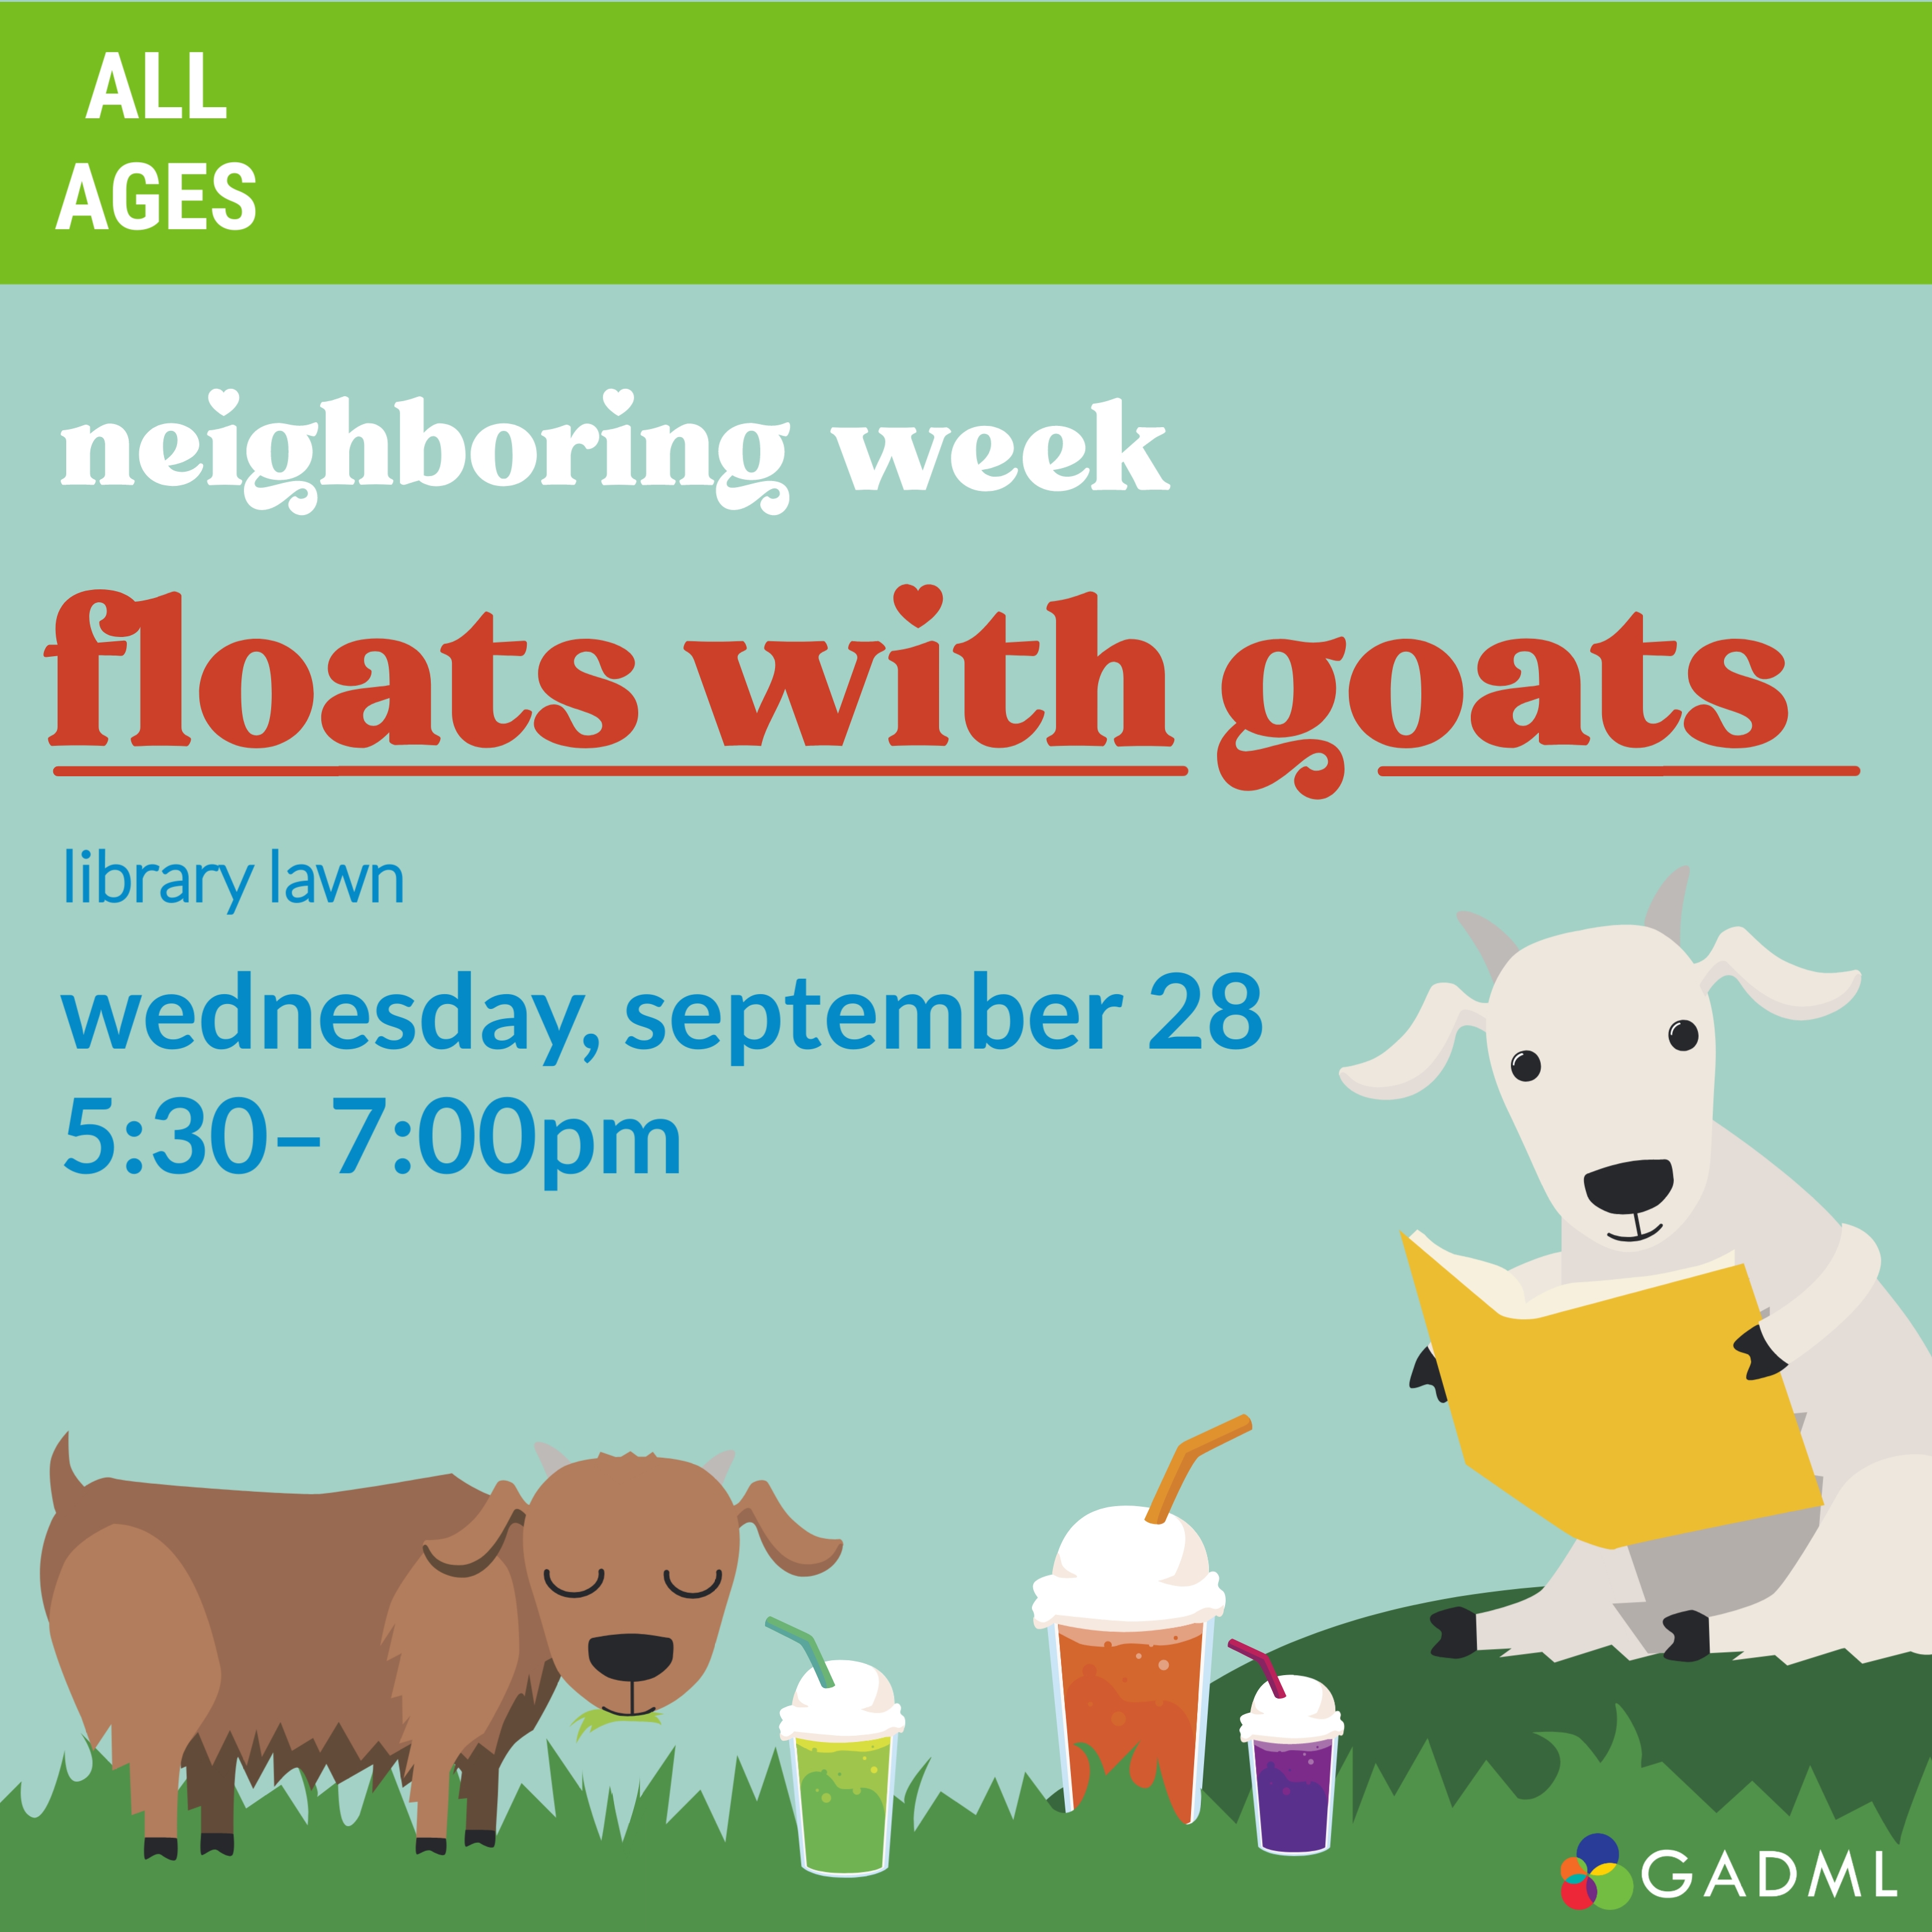 floats with goats